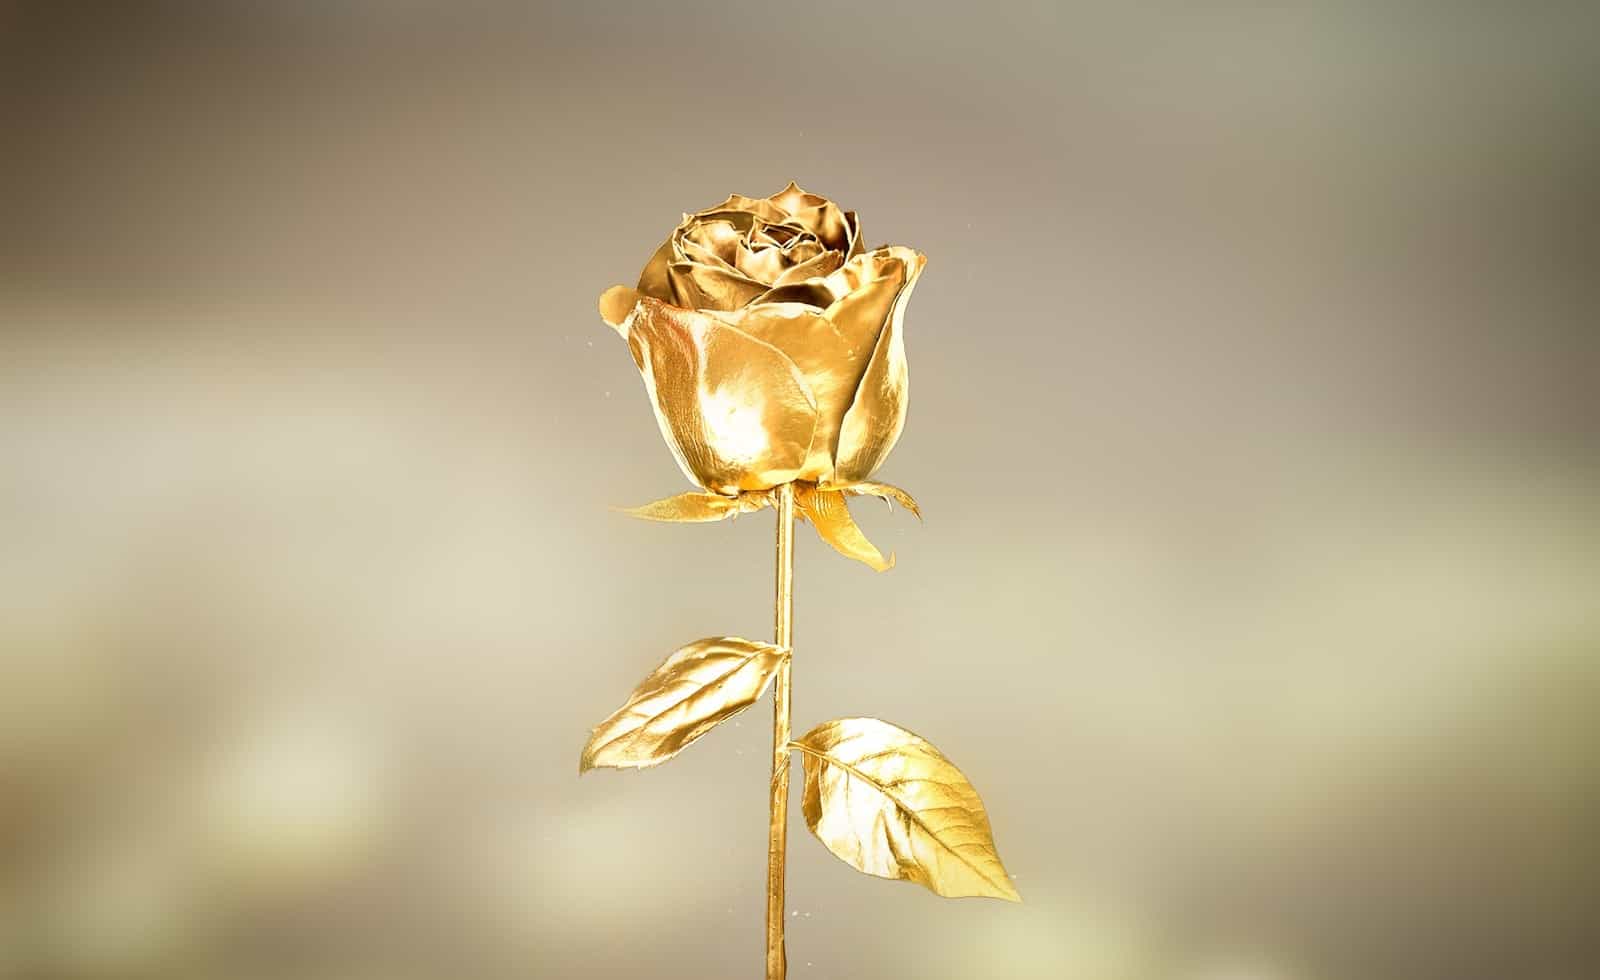 https://www.prettyopinionated.com/wp-content/uploads/2021/04/preserved-gold-rose.jpg